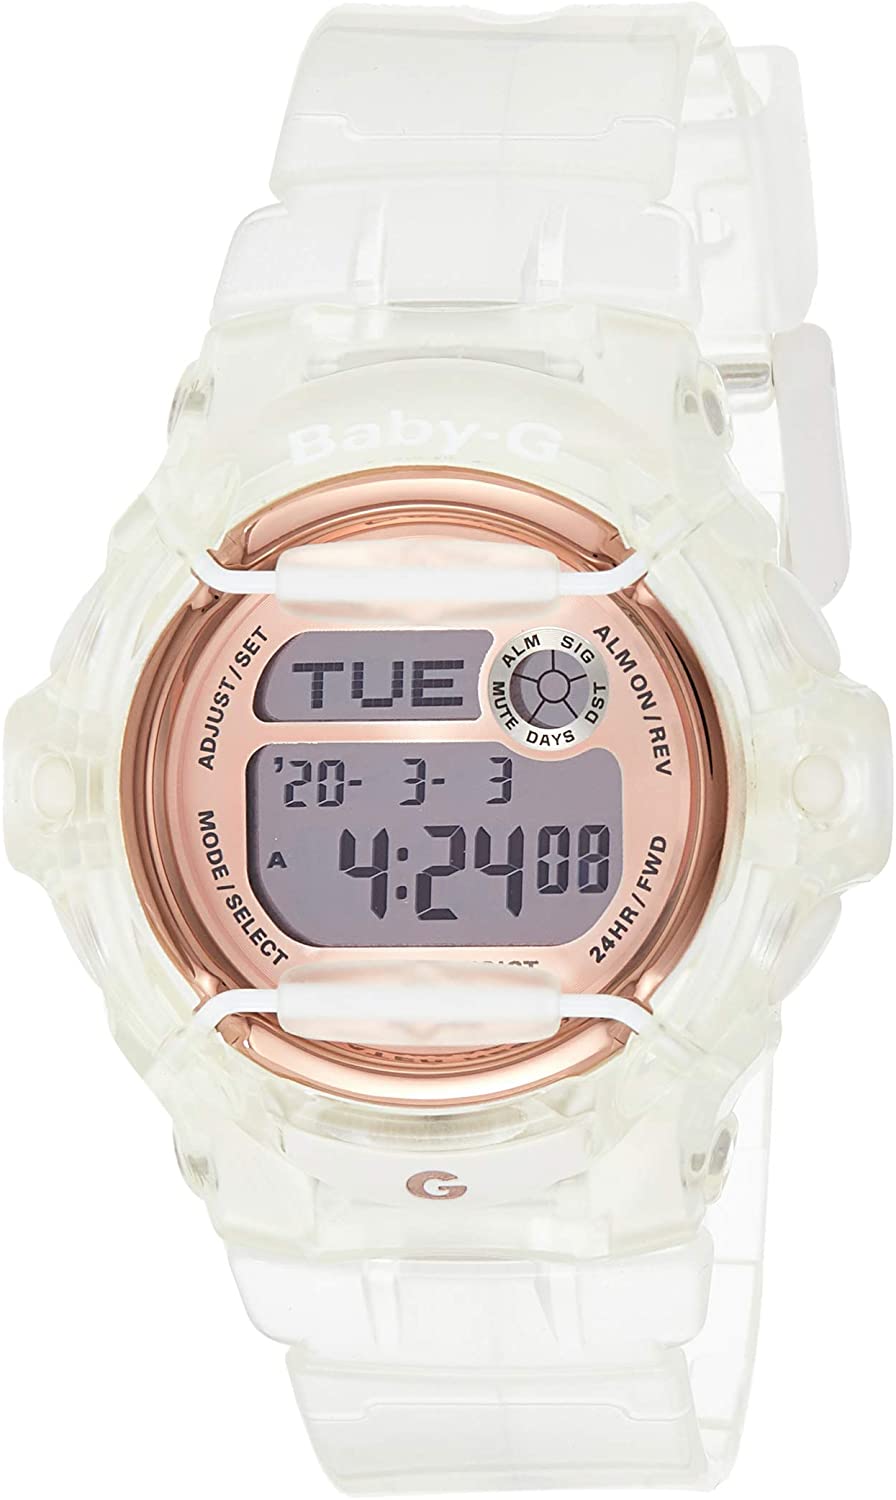 Casio Stainless Steel Watch with Resin Strap, Clear, 19 (Model: BG-169G-7BCR)